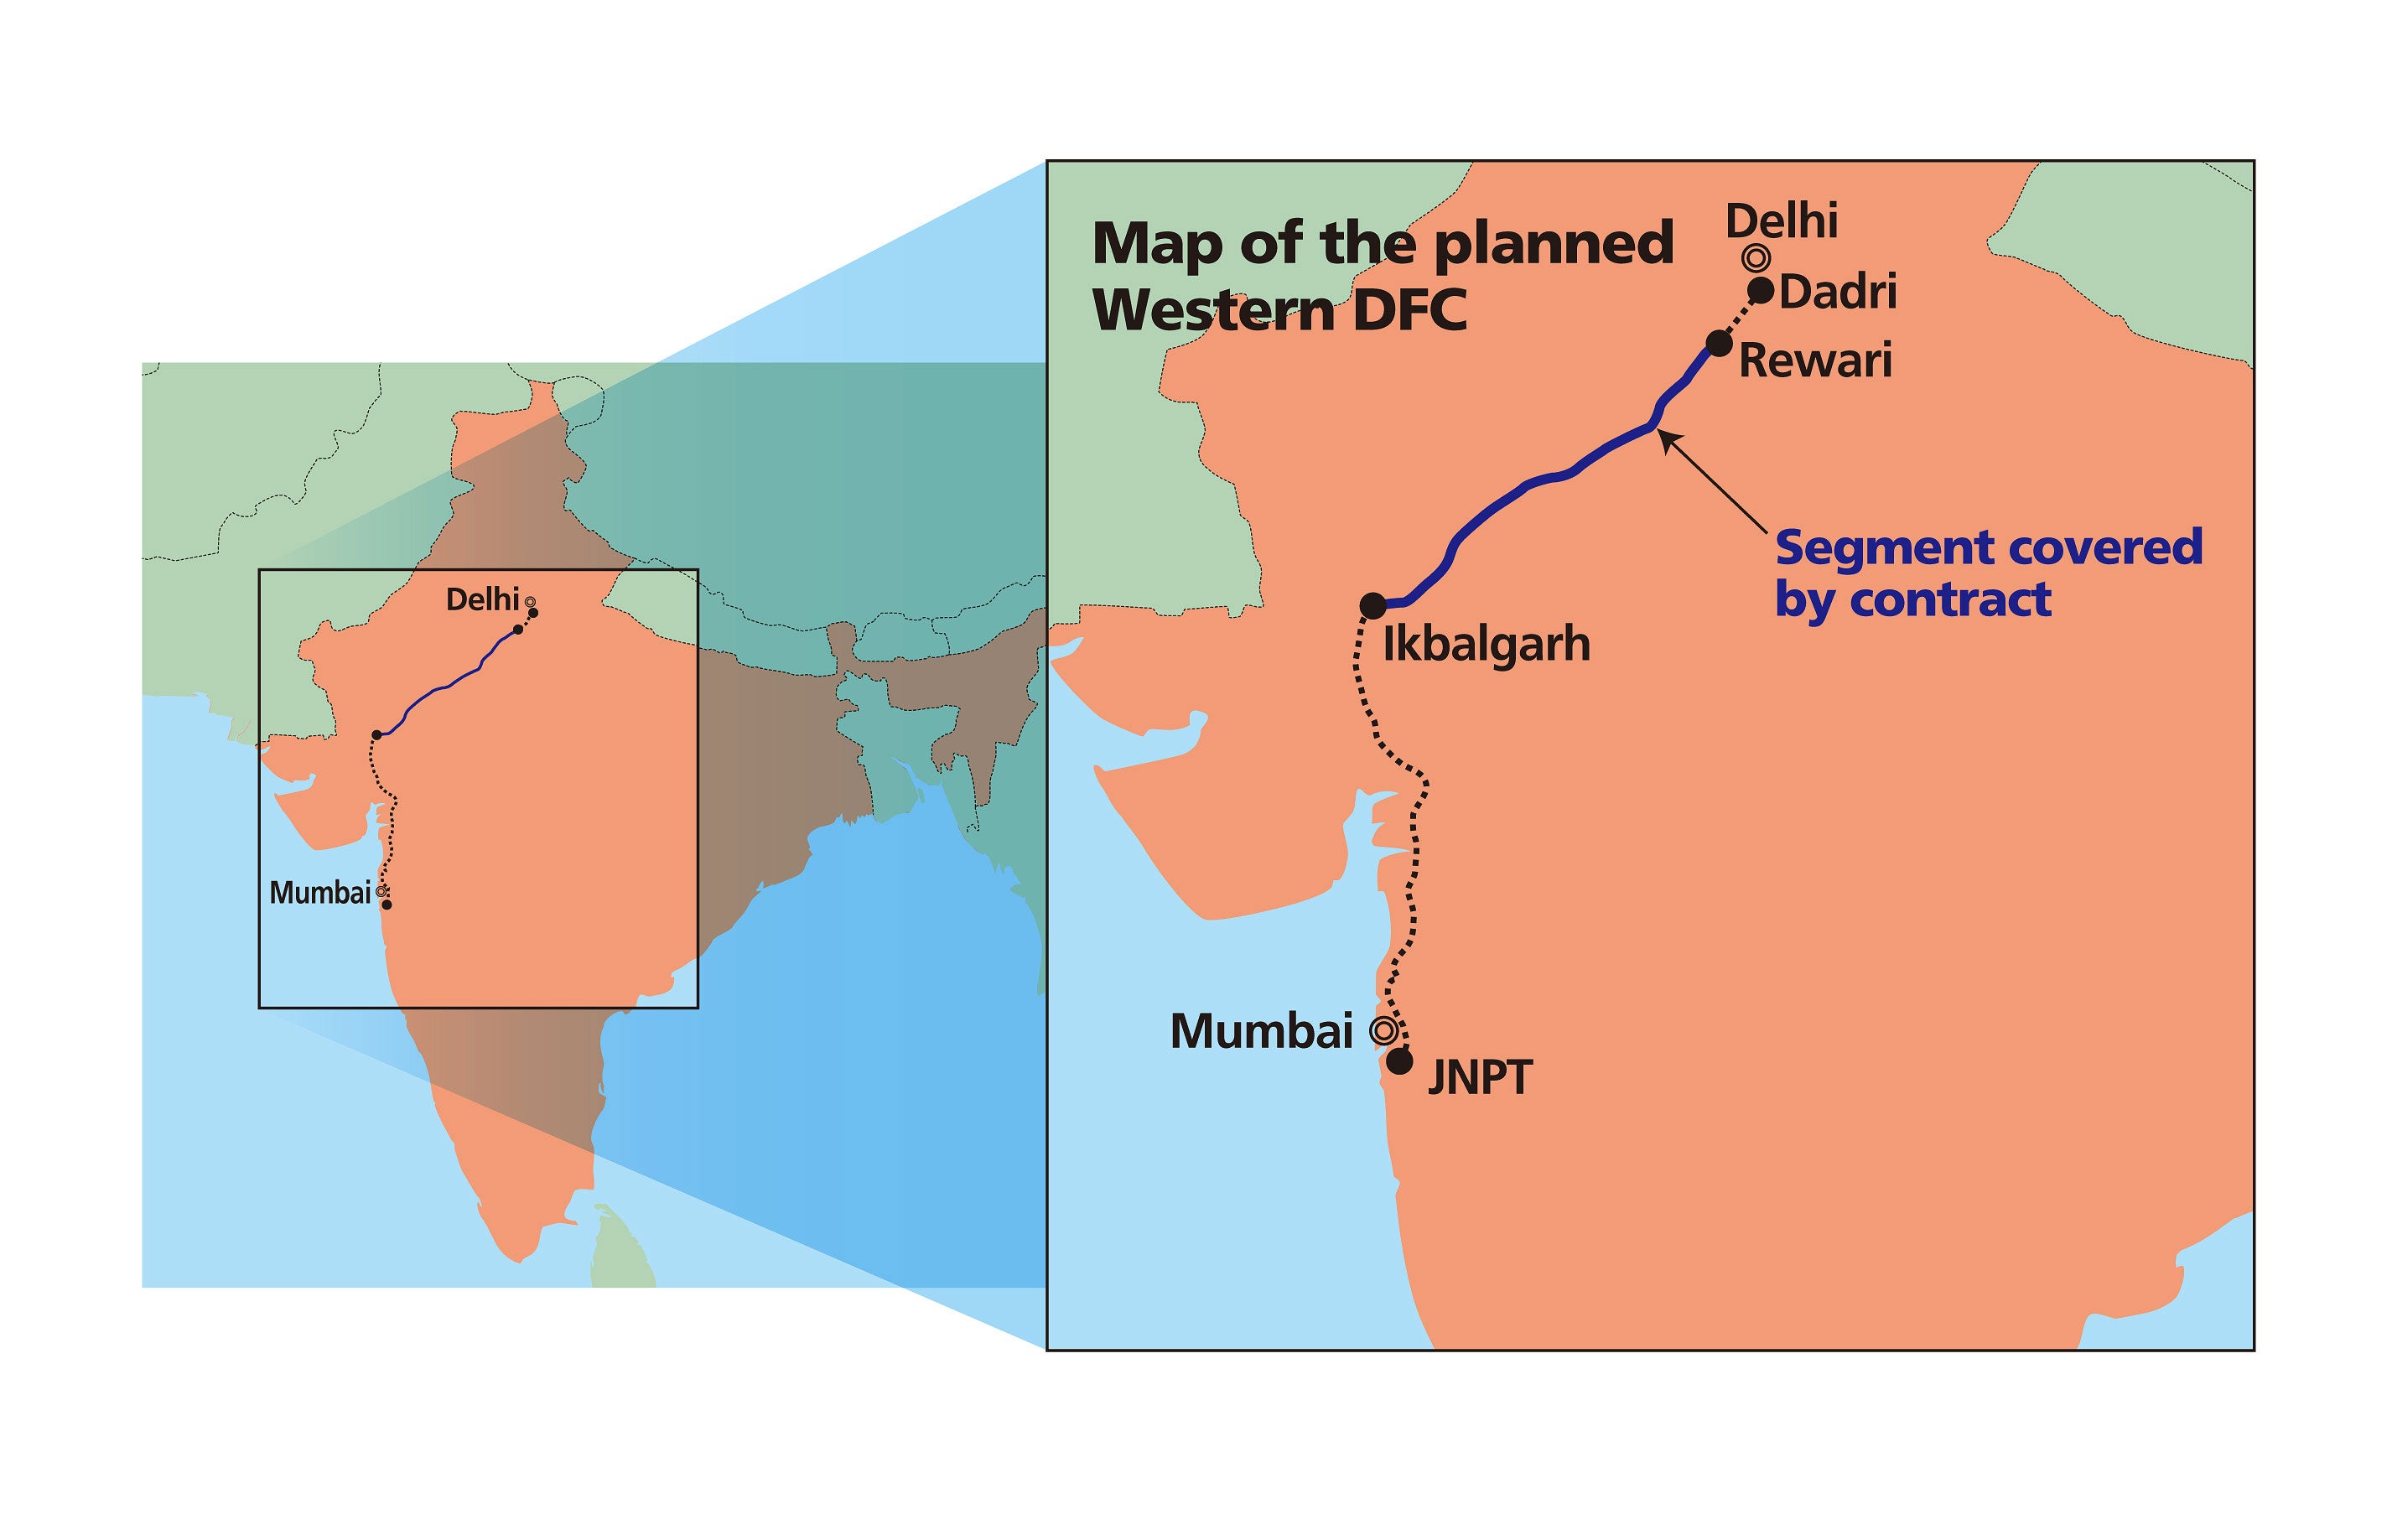 India-Western DFC Project